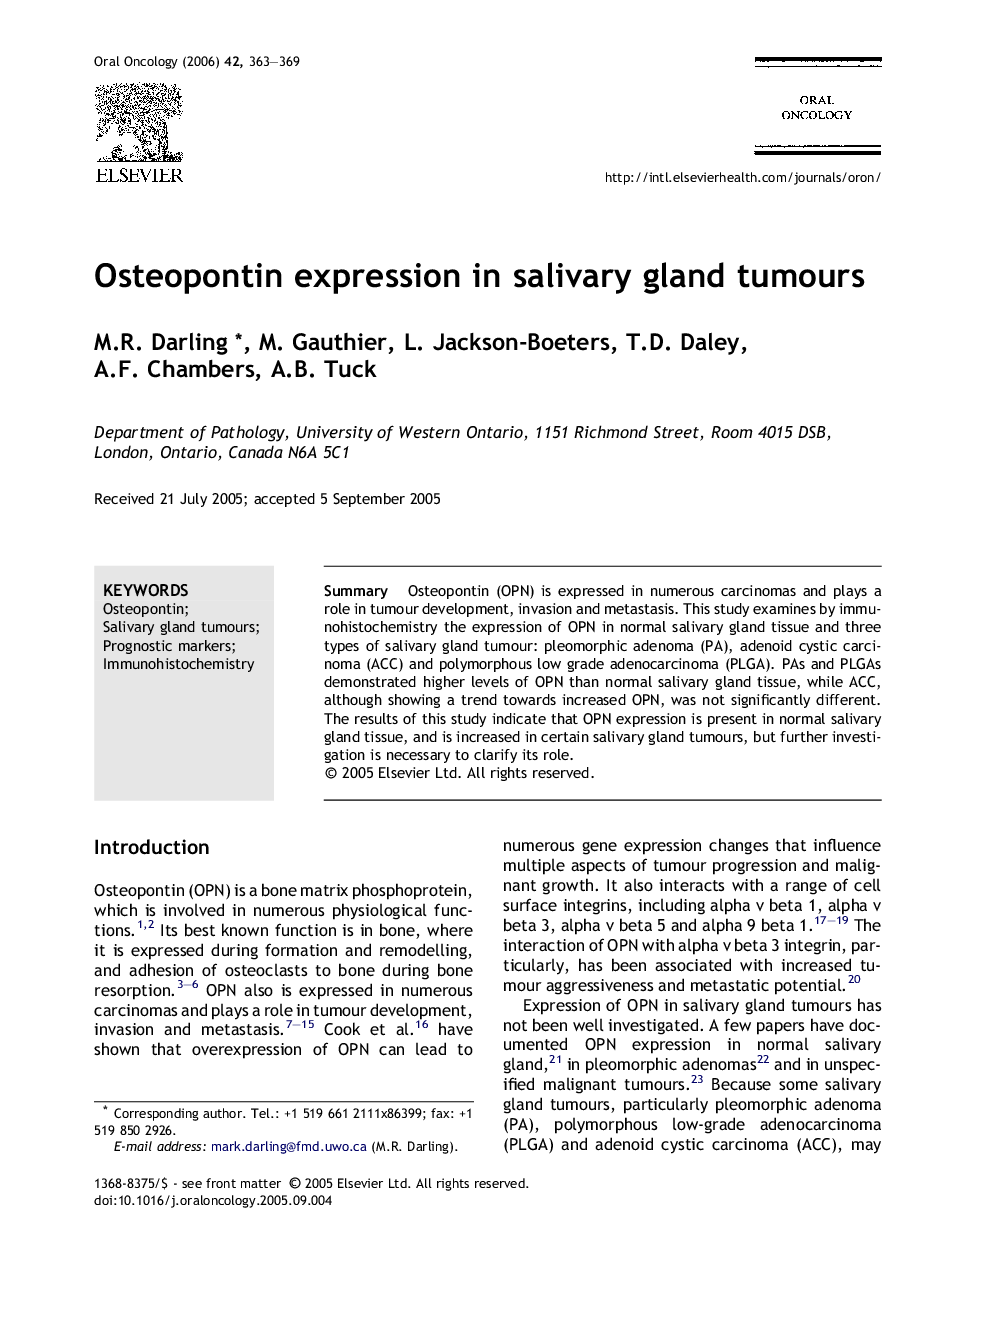 Osteopontin expression in salivary gland tumours